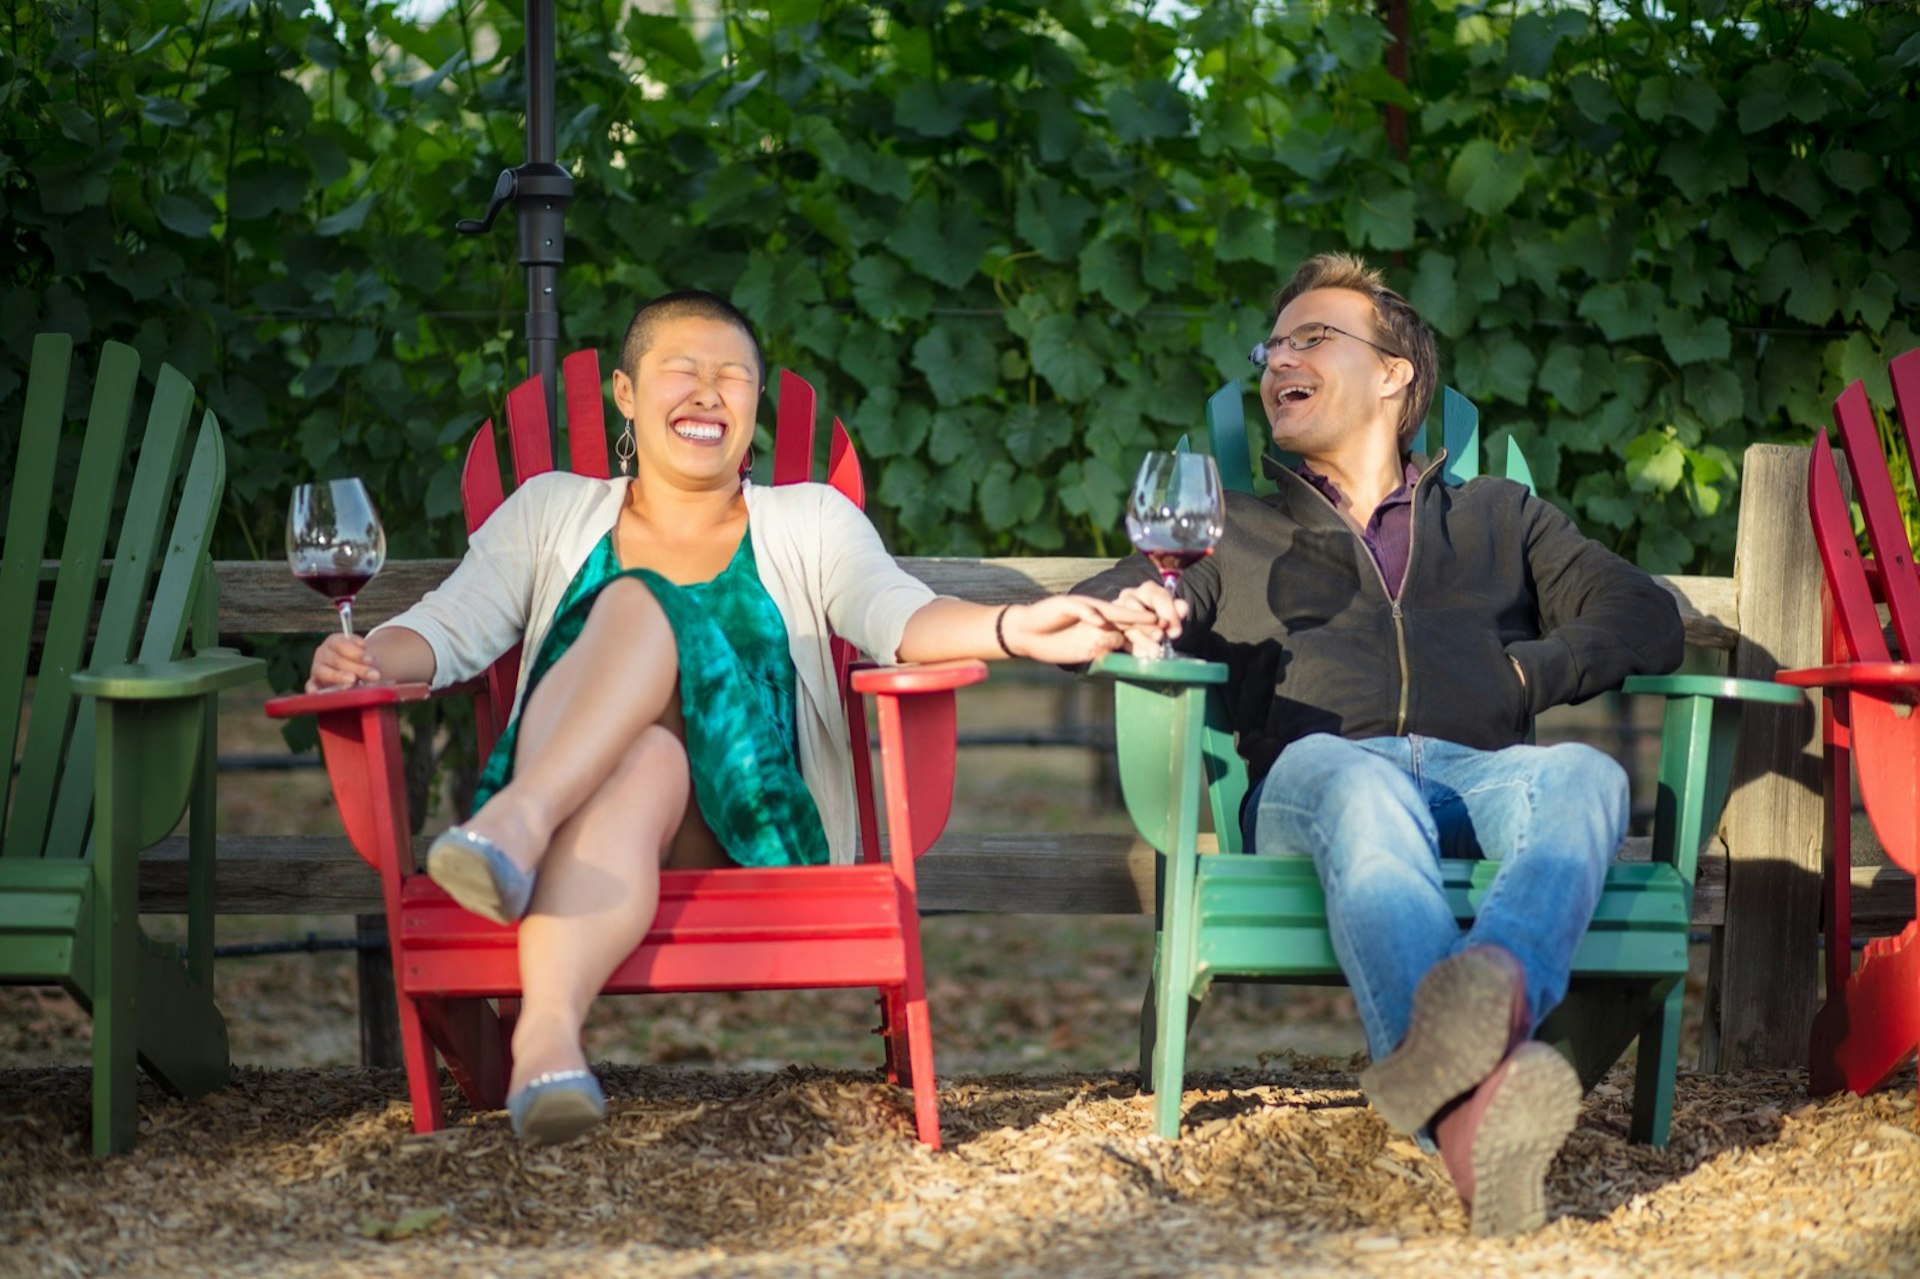 A man and a woman lean comfortably in Adirondack chairs laughing with glasses of wine